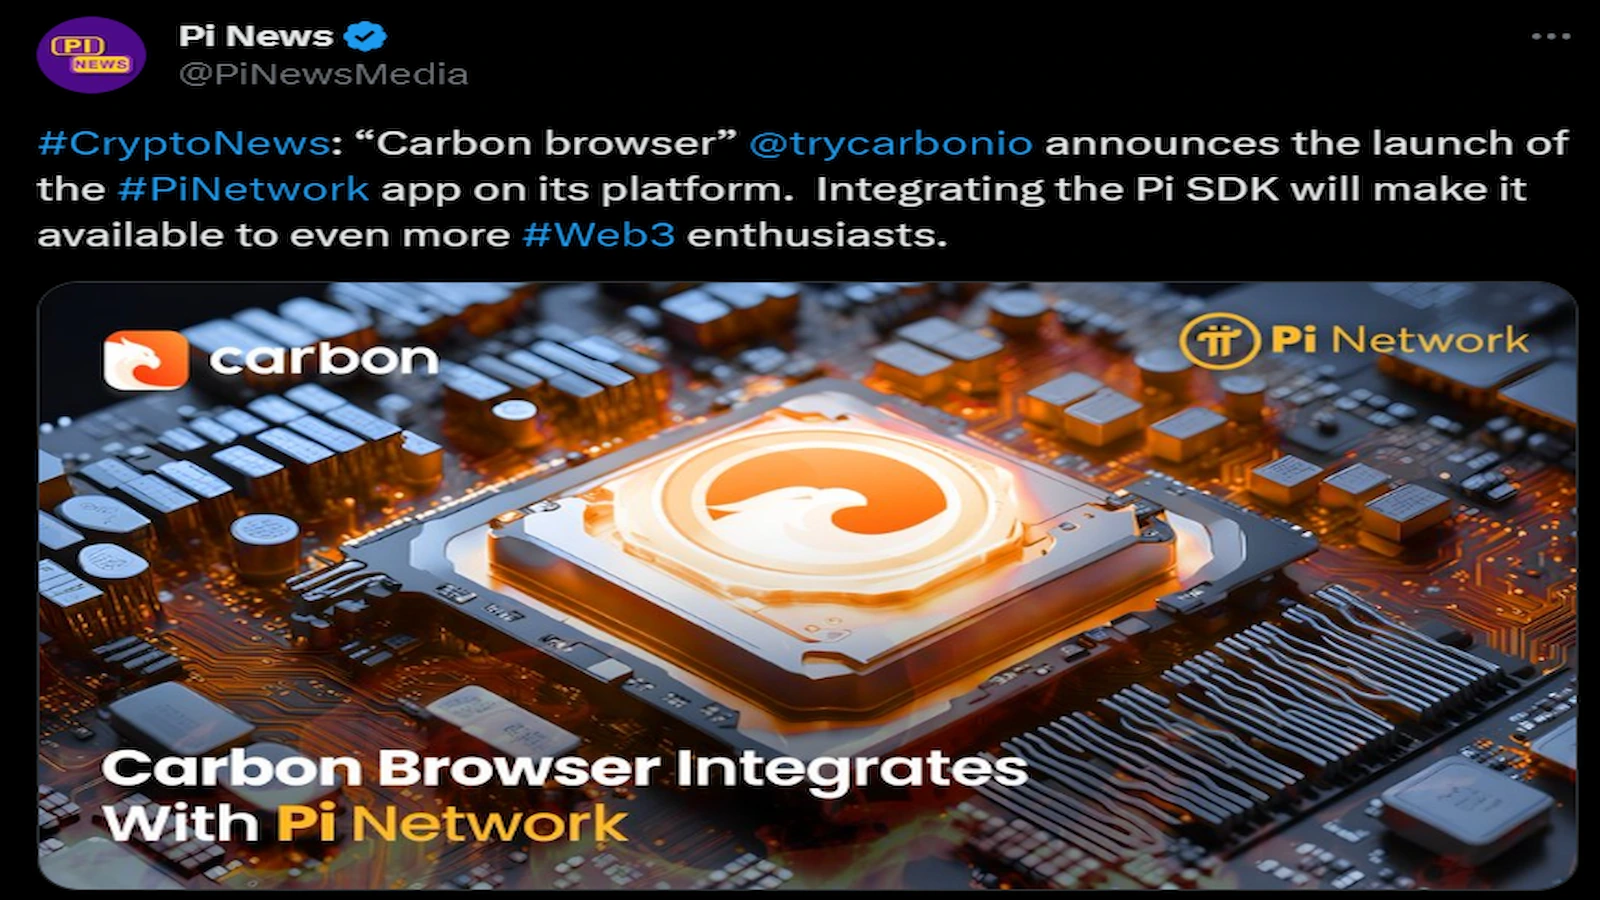 Carbon browser announced launch of Pi Network app on its platfrom.